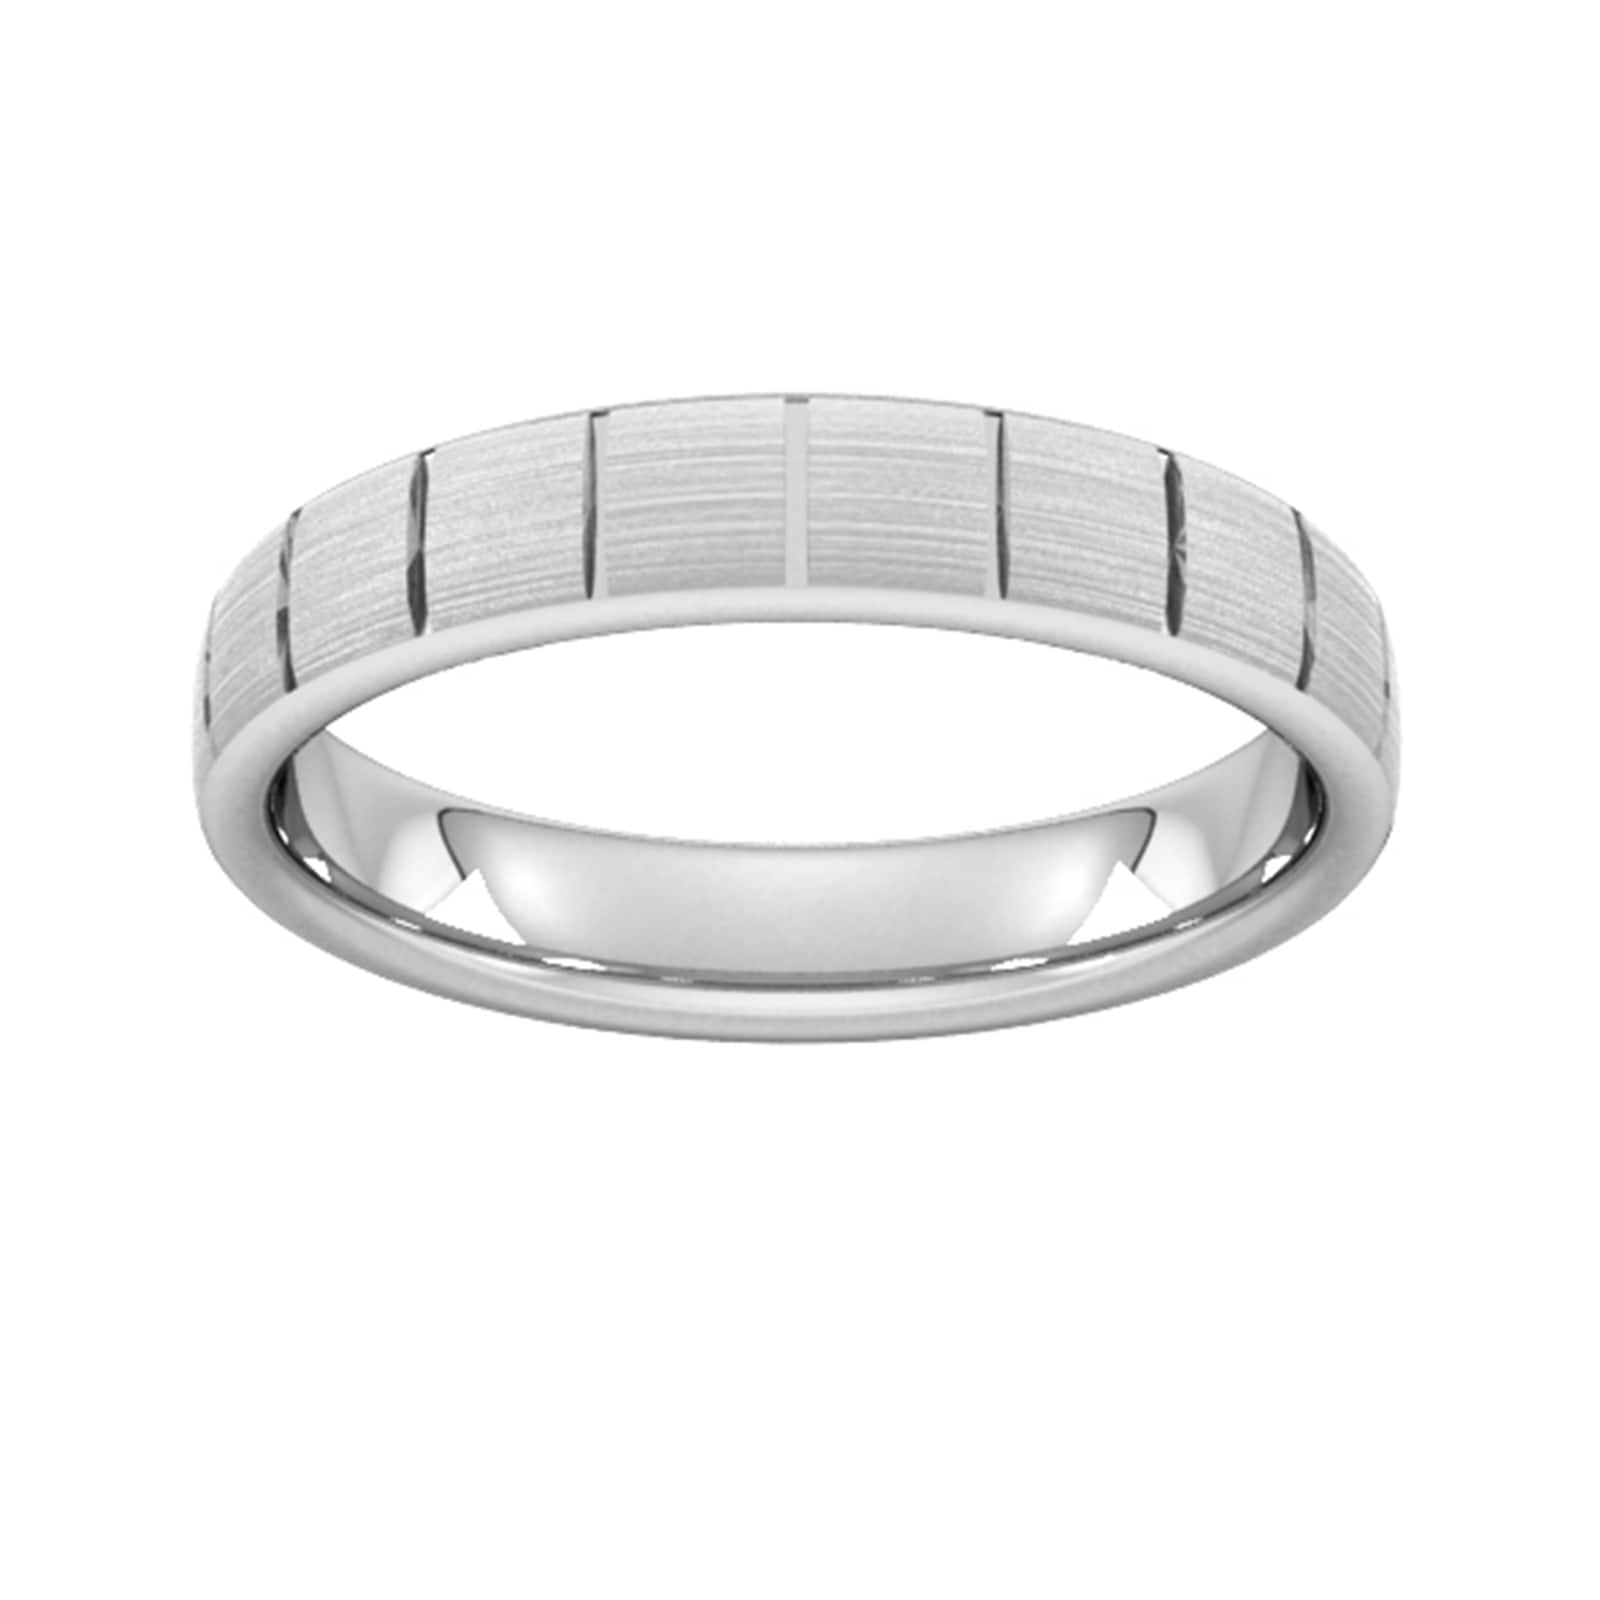 4mm Traditional Court Heavy Vertical Lines Wedding Ring In 9 Carat White Gold - Ring Size J